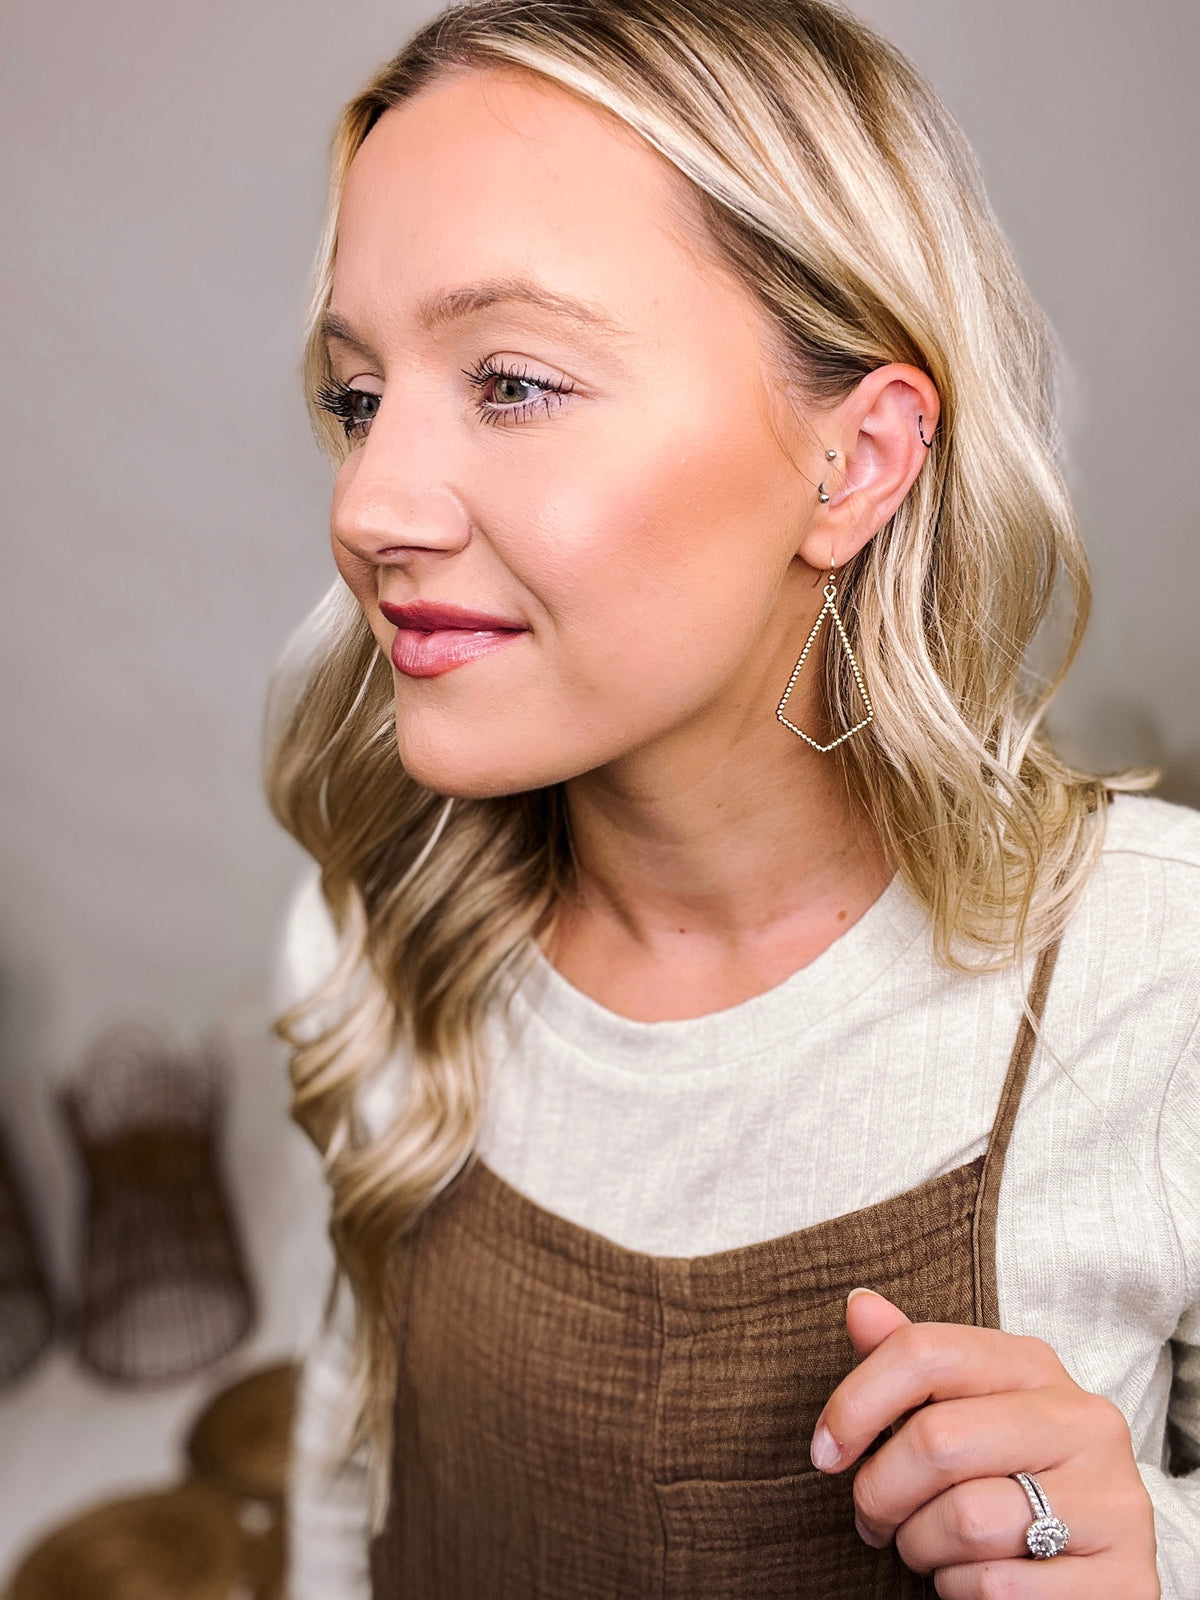 Elevate your everyday style with our stunning Gold Metal Textured Teardrop Drop Earrings, measuring approximately 2 inches in length. These earrings are the perfect addition to your casual wear, adding a touch of elegance to your daily outfits